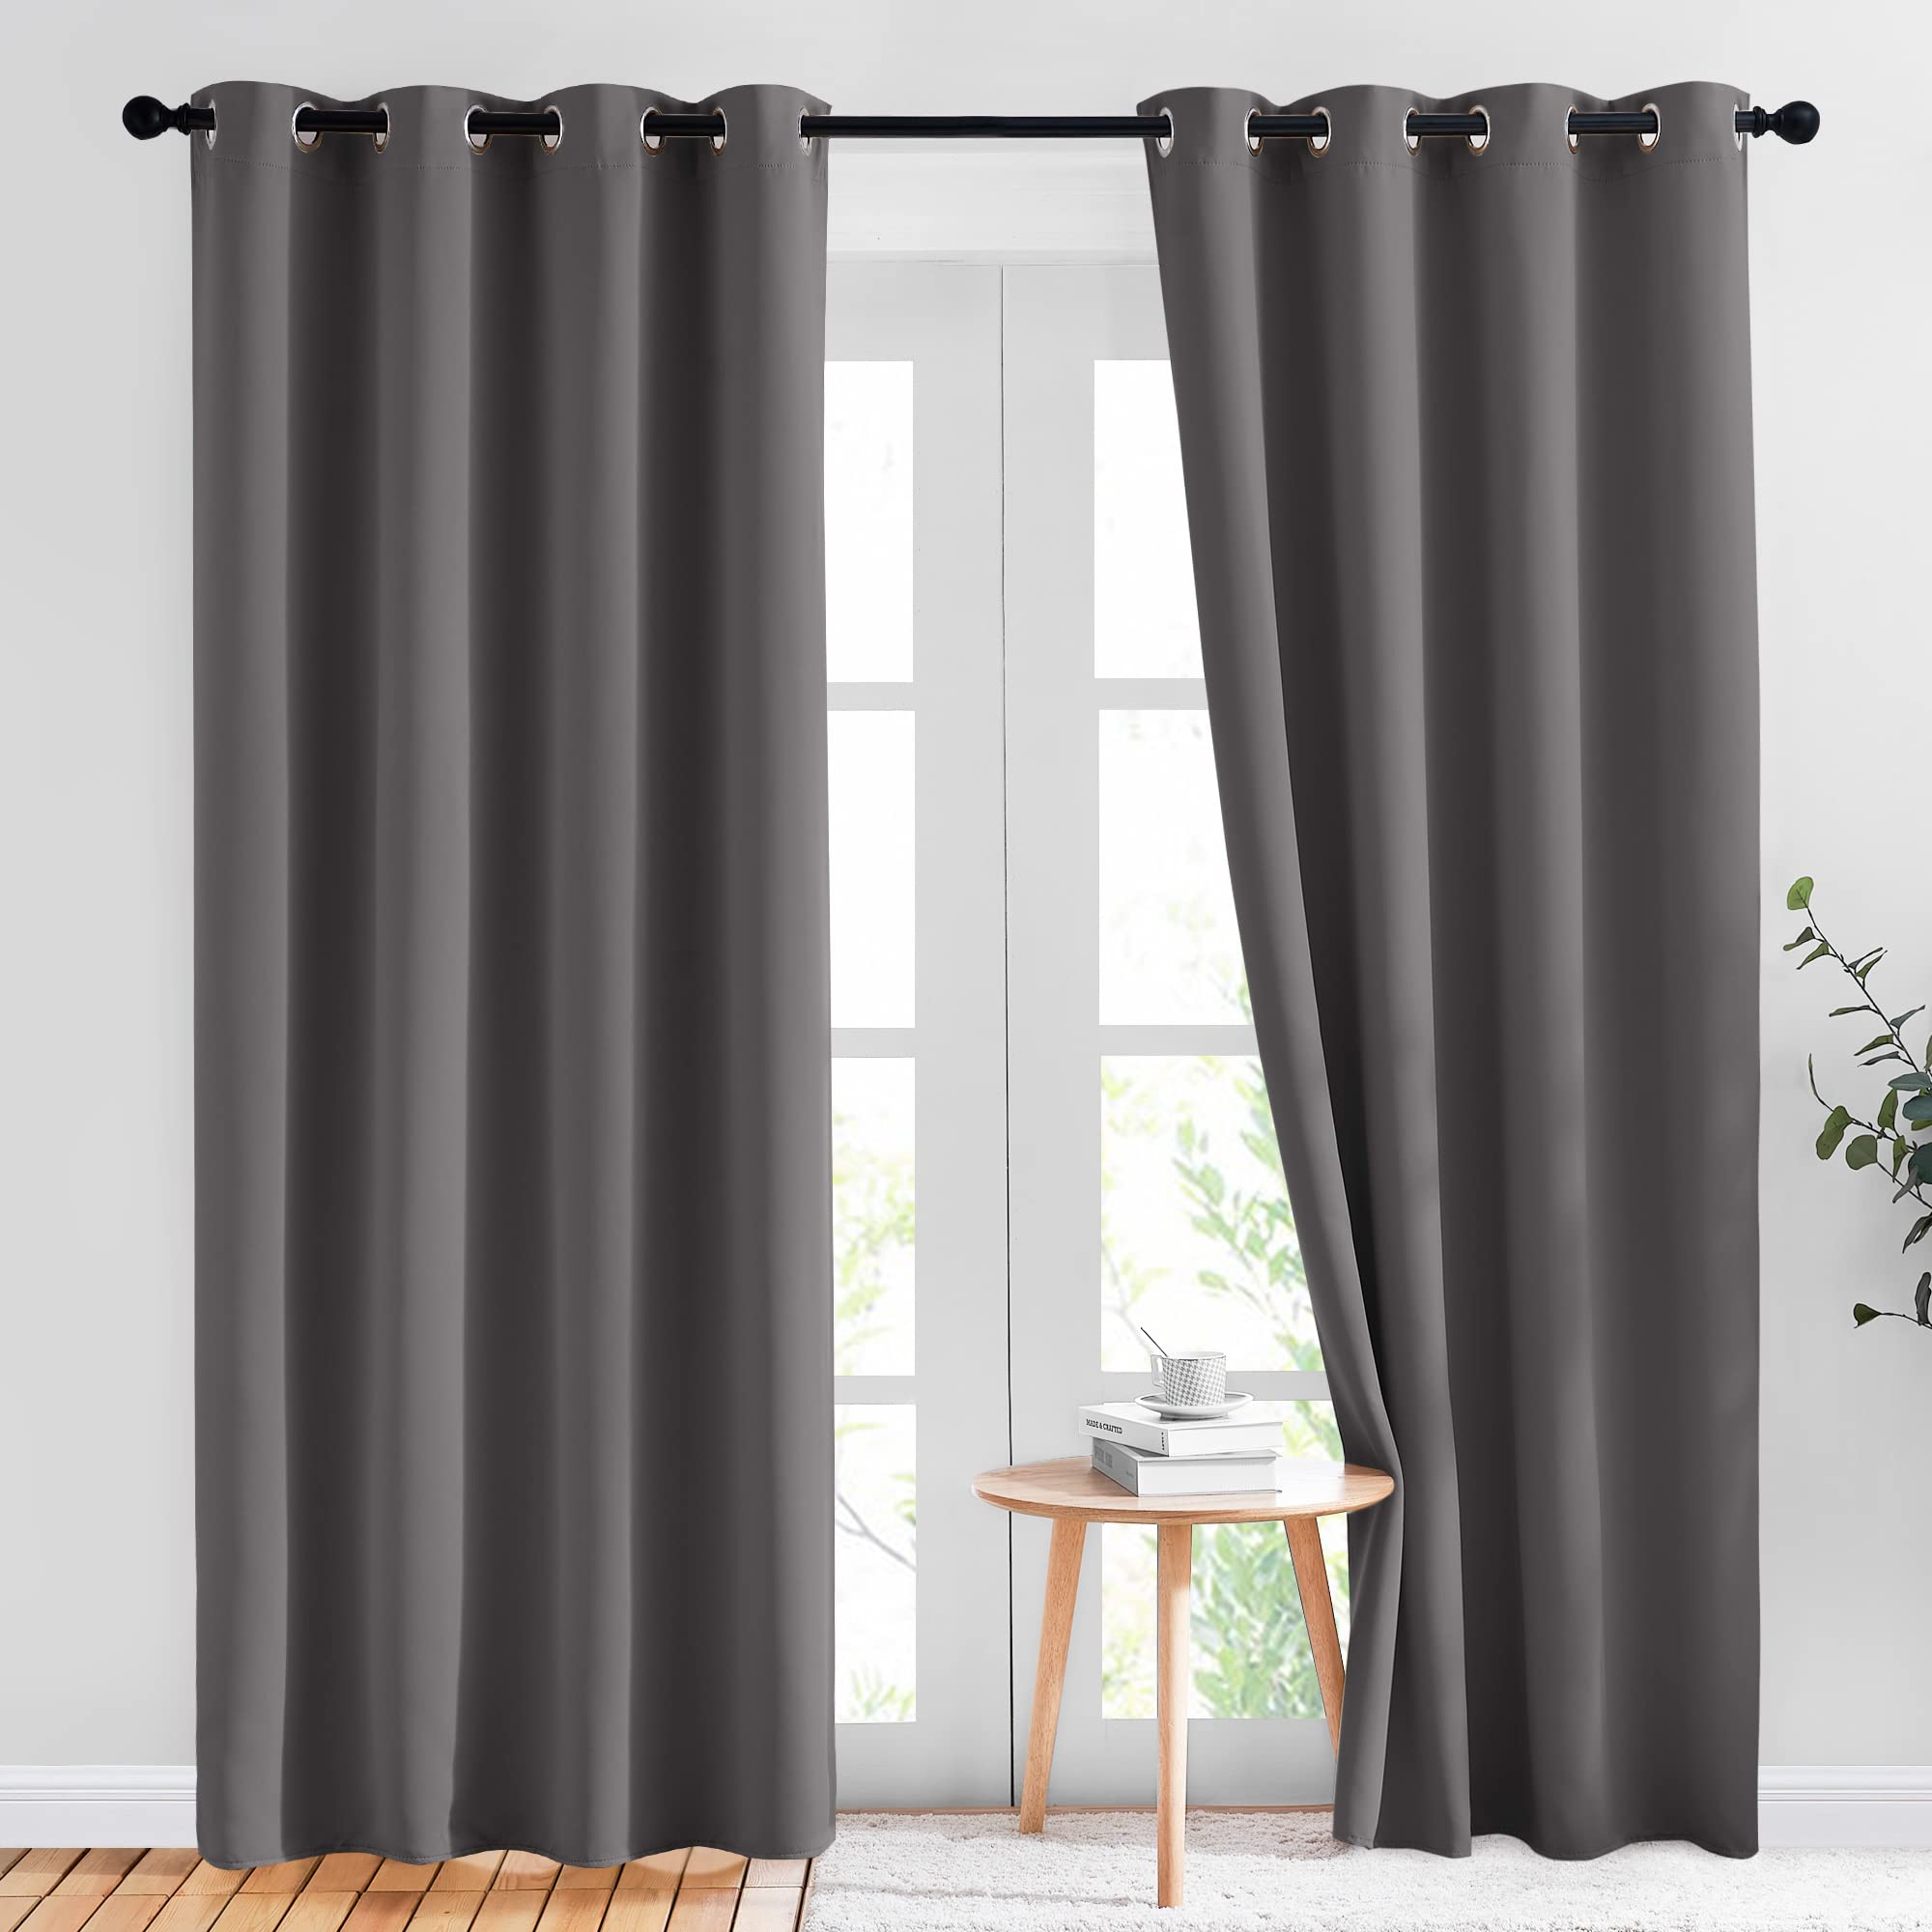 NICETOWN Gray Blackout Curtains for Bedroom 84 inches Long - Thermal Curtains & Drapes Grommet Noise Reducing Room Darkening Sol